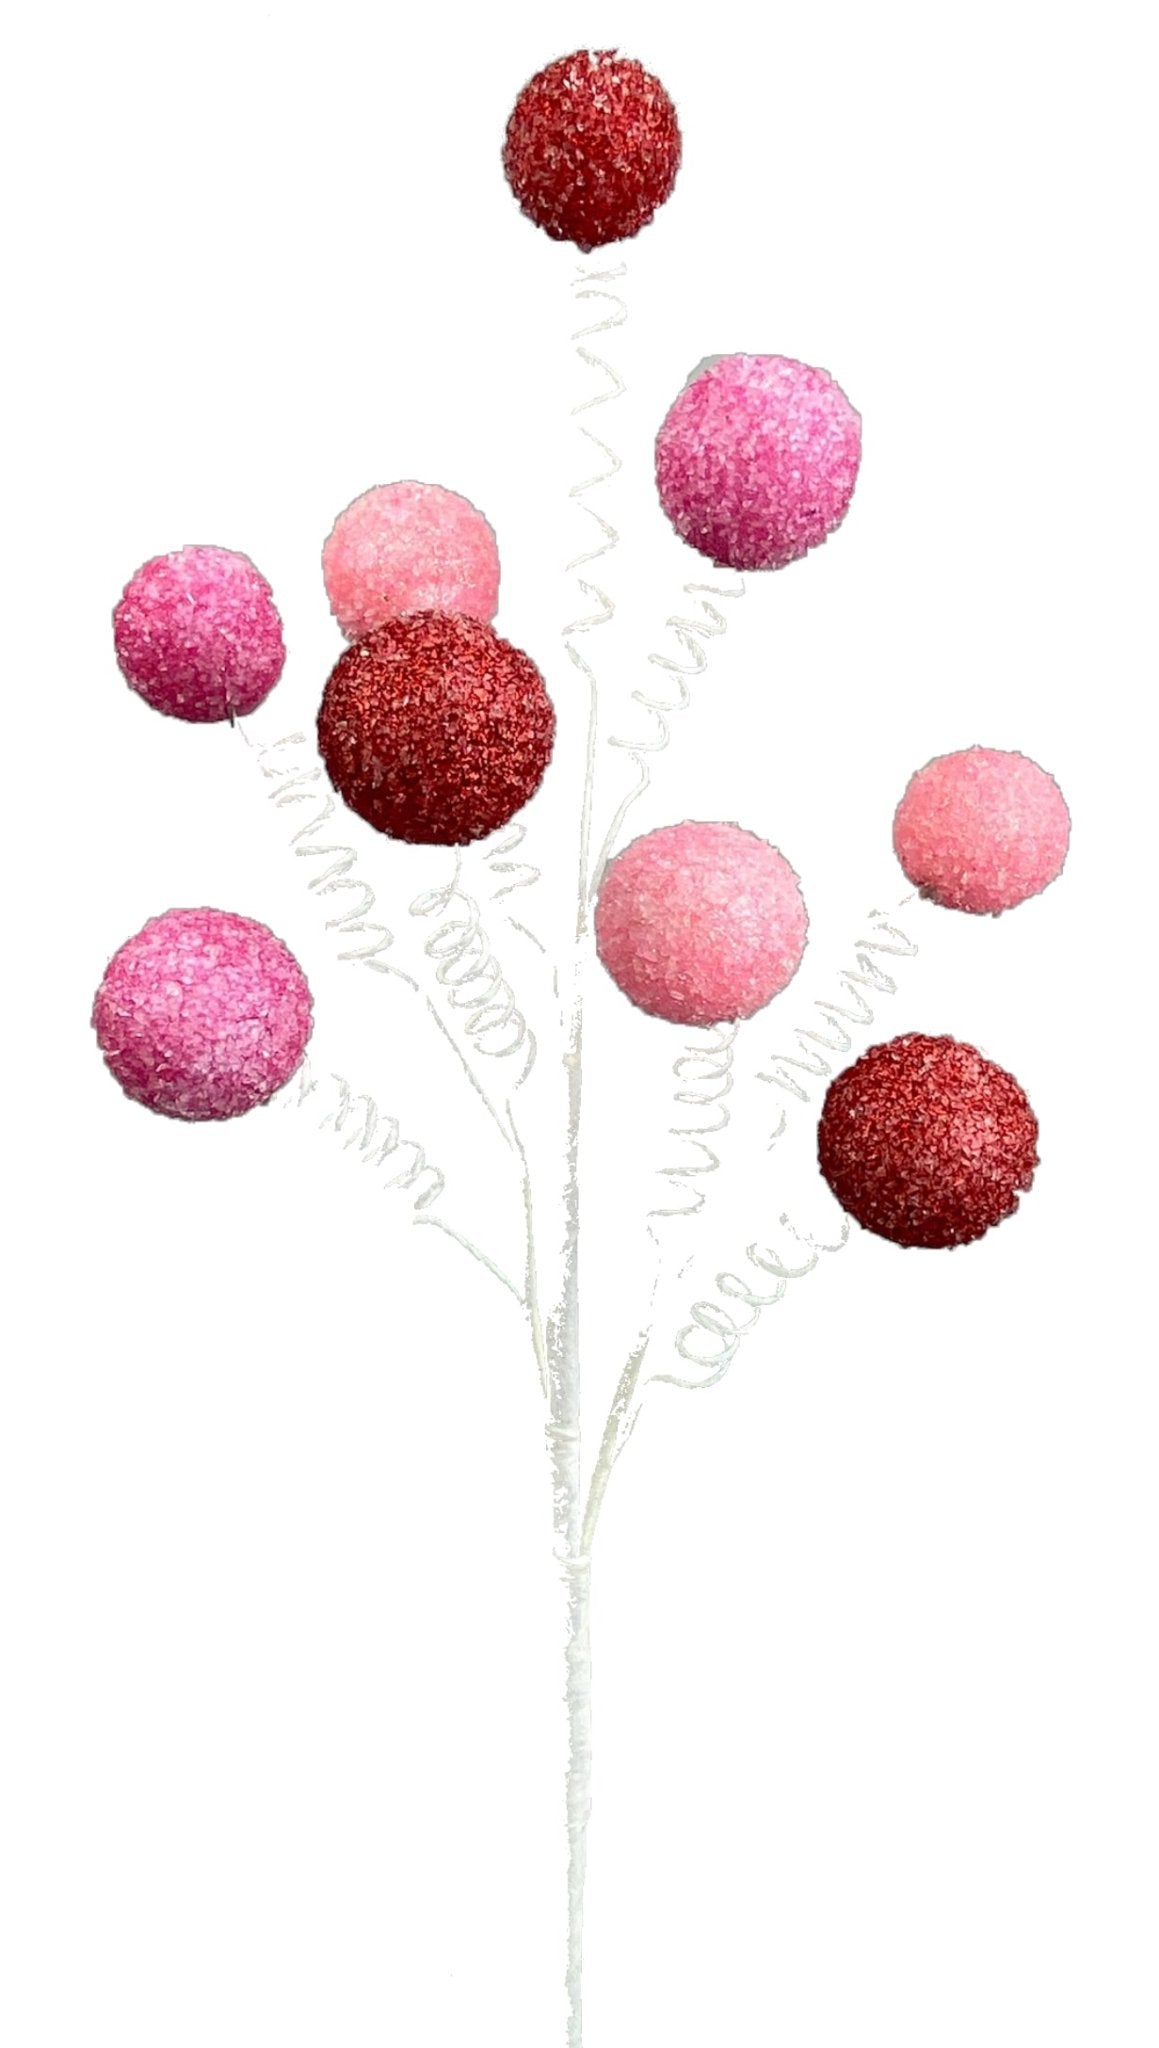 Red and pink gum ball pick - Greenery Market85791RDPK